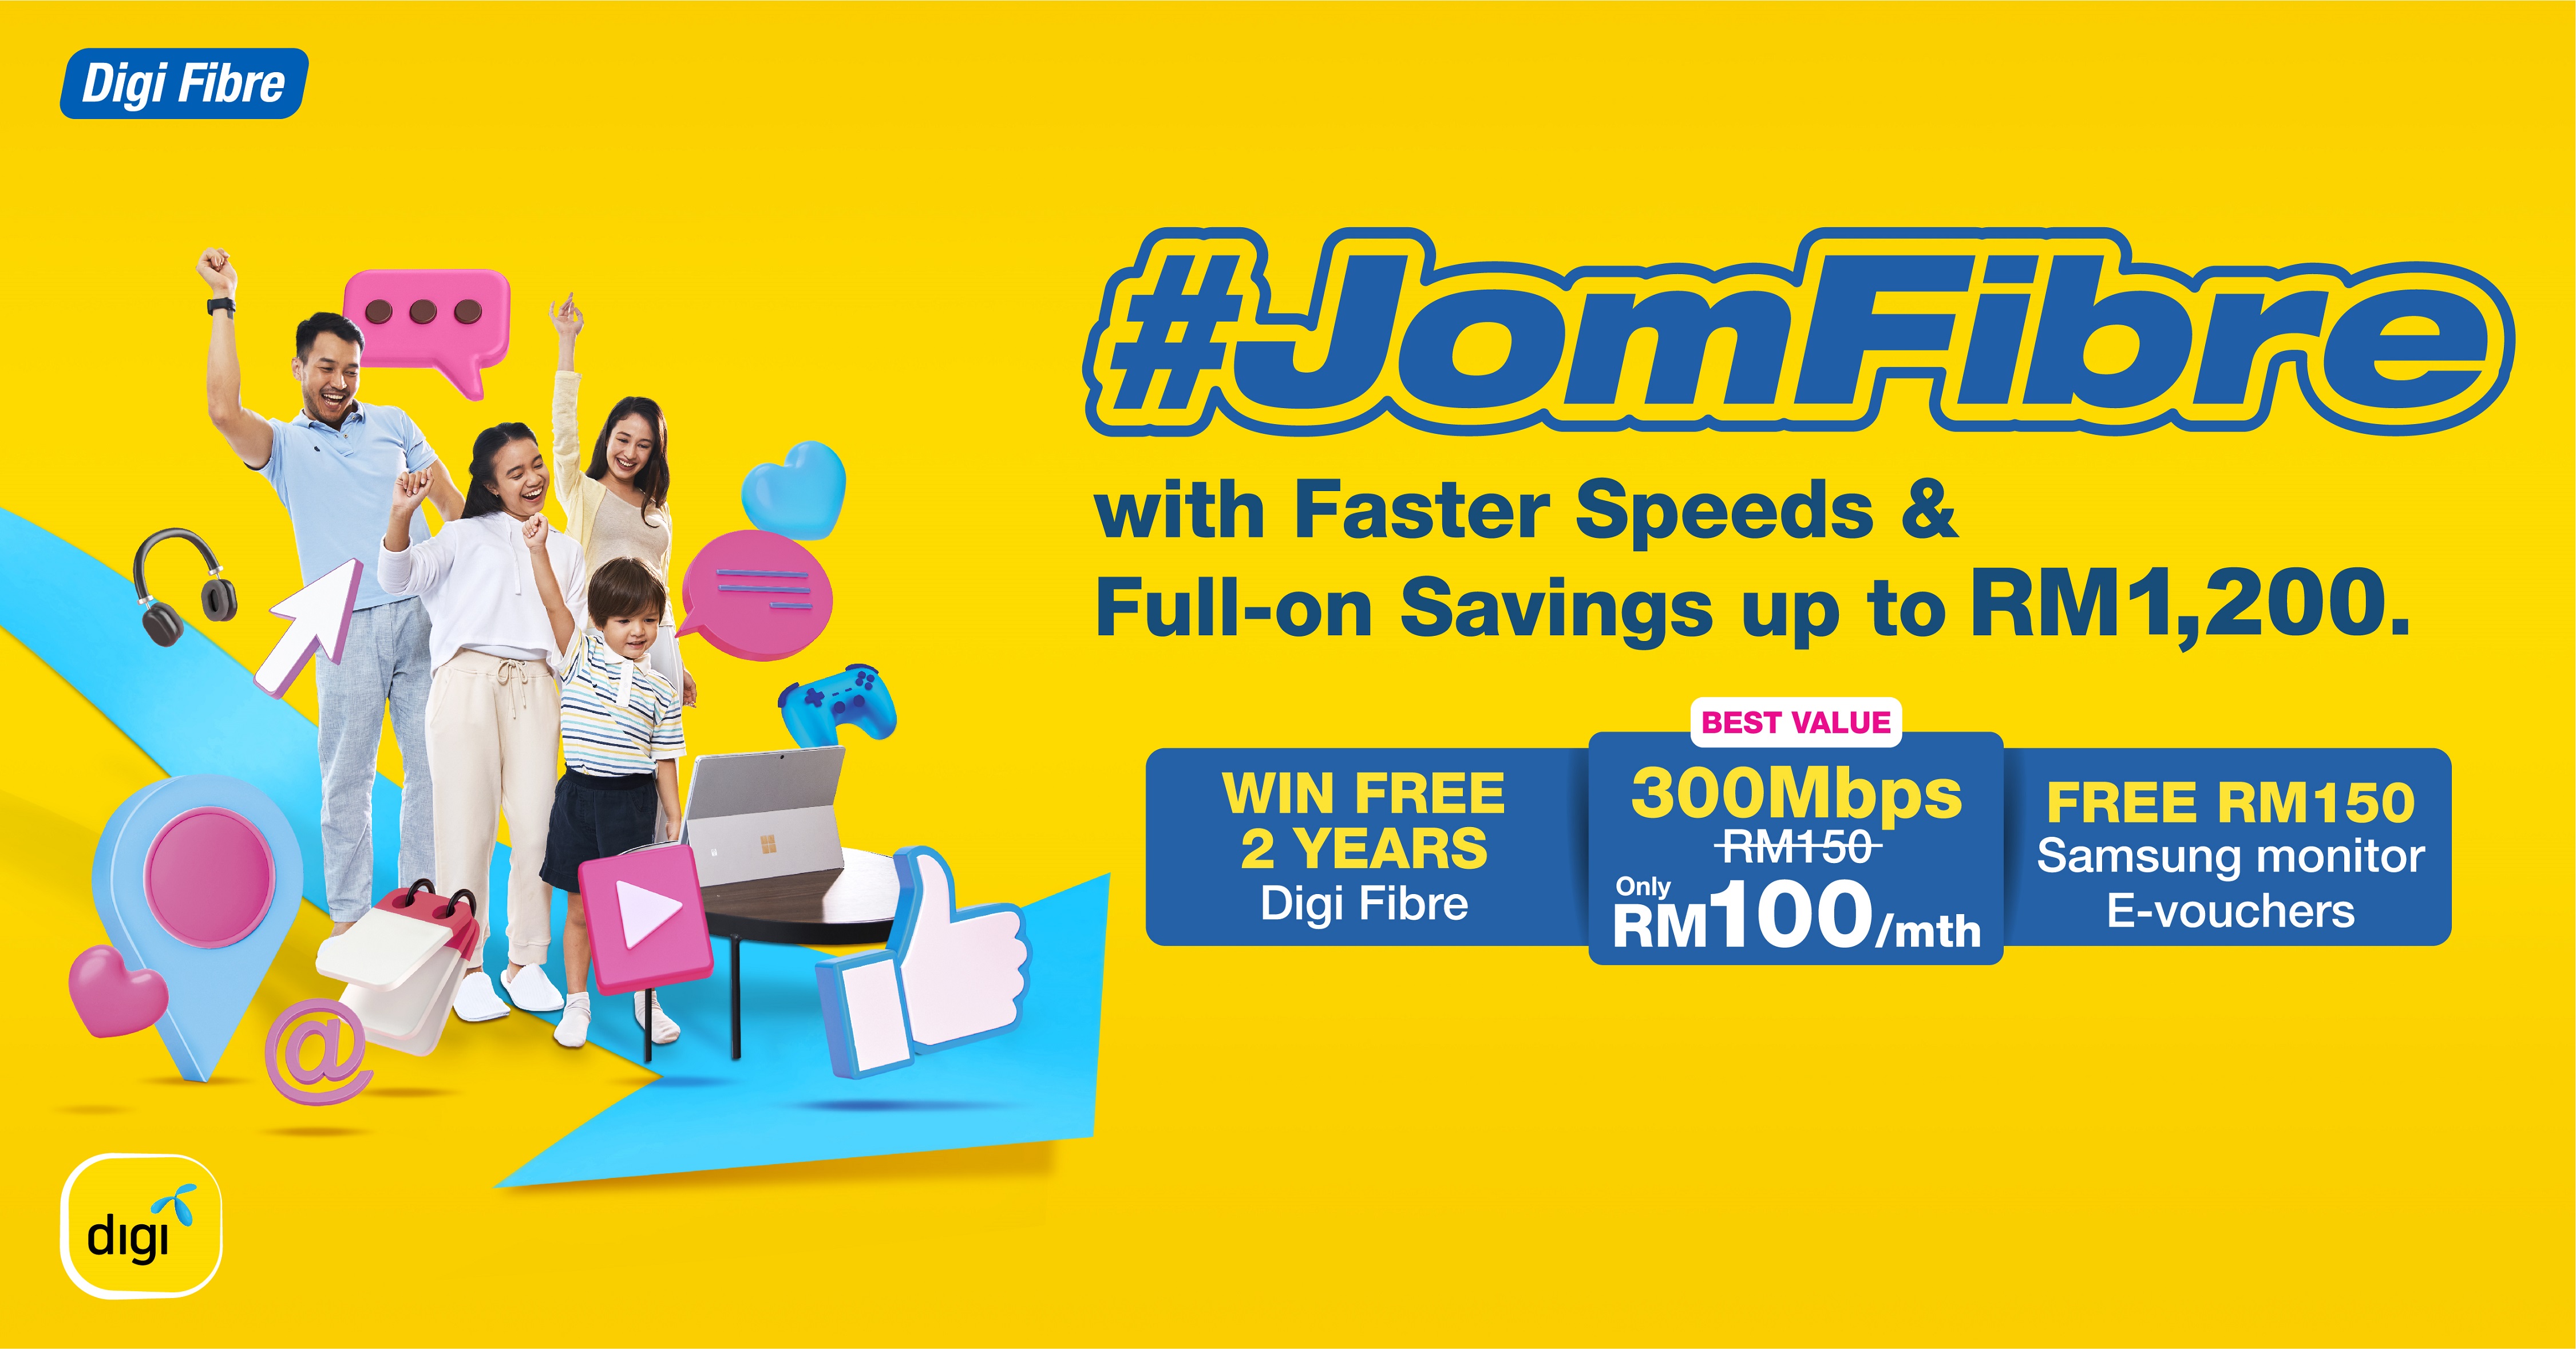 Digi launches JomFibre campaign with more savings